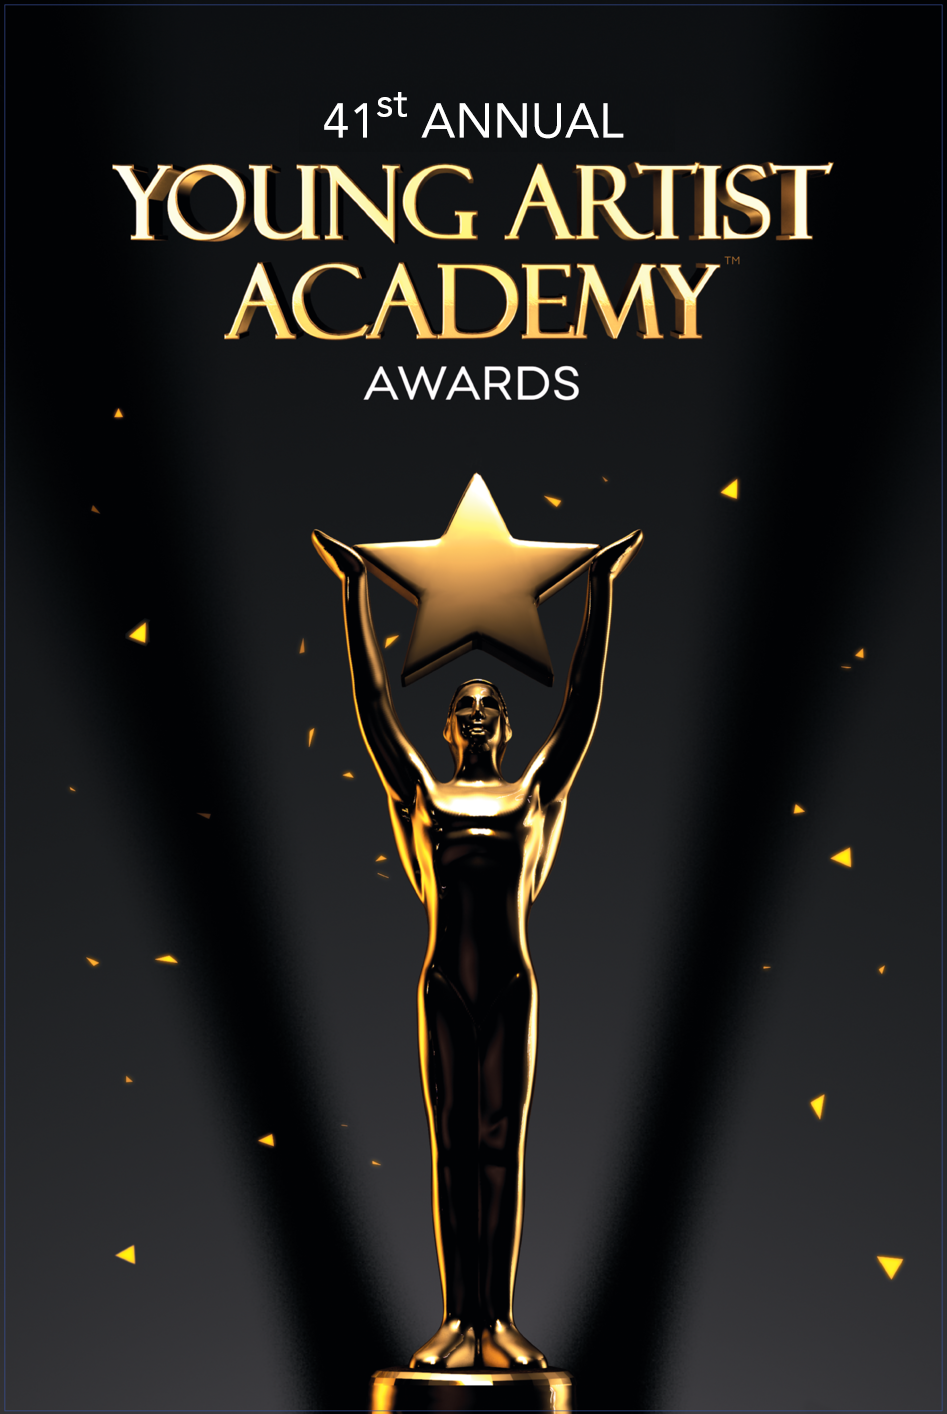 Young Artist Academy™ 41st Awards Announcements: 4 New Special Merit Recipients; 22 New Awards Presenters